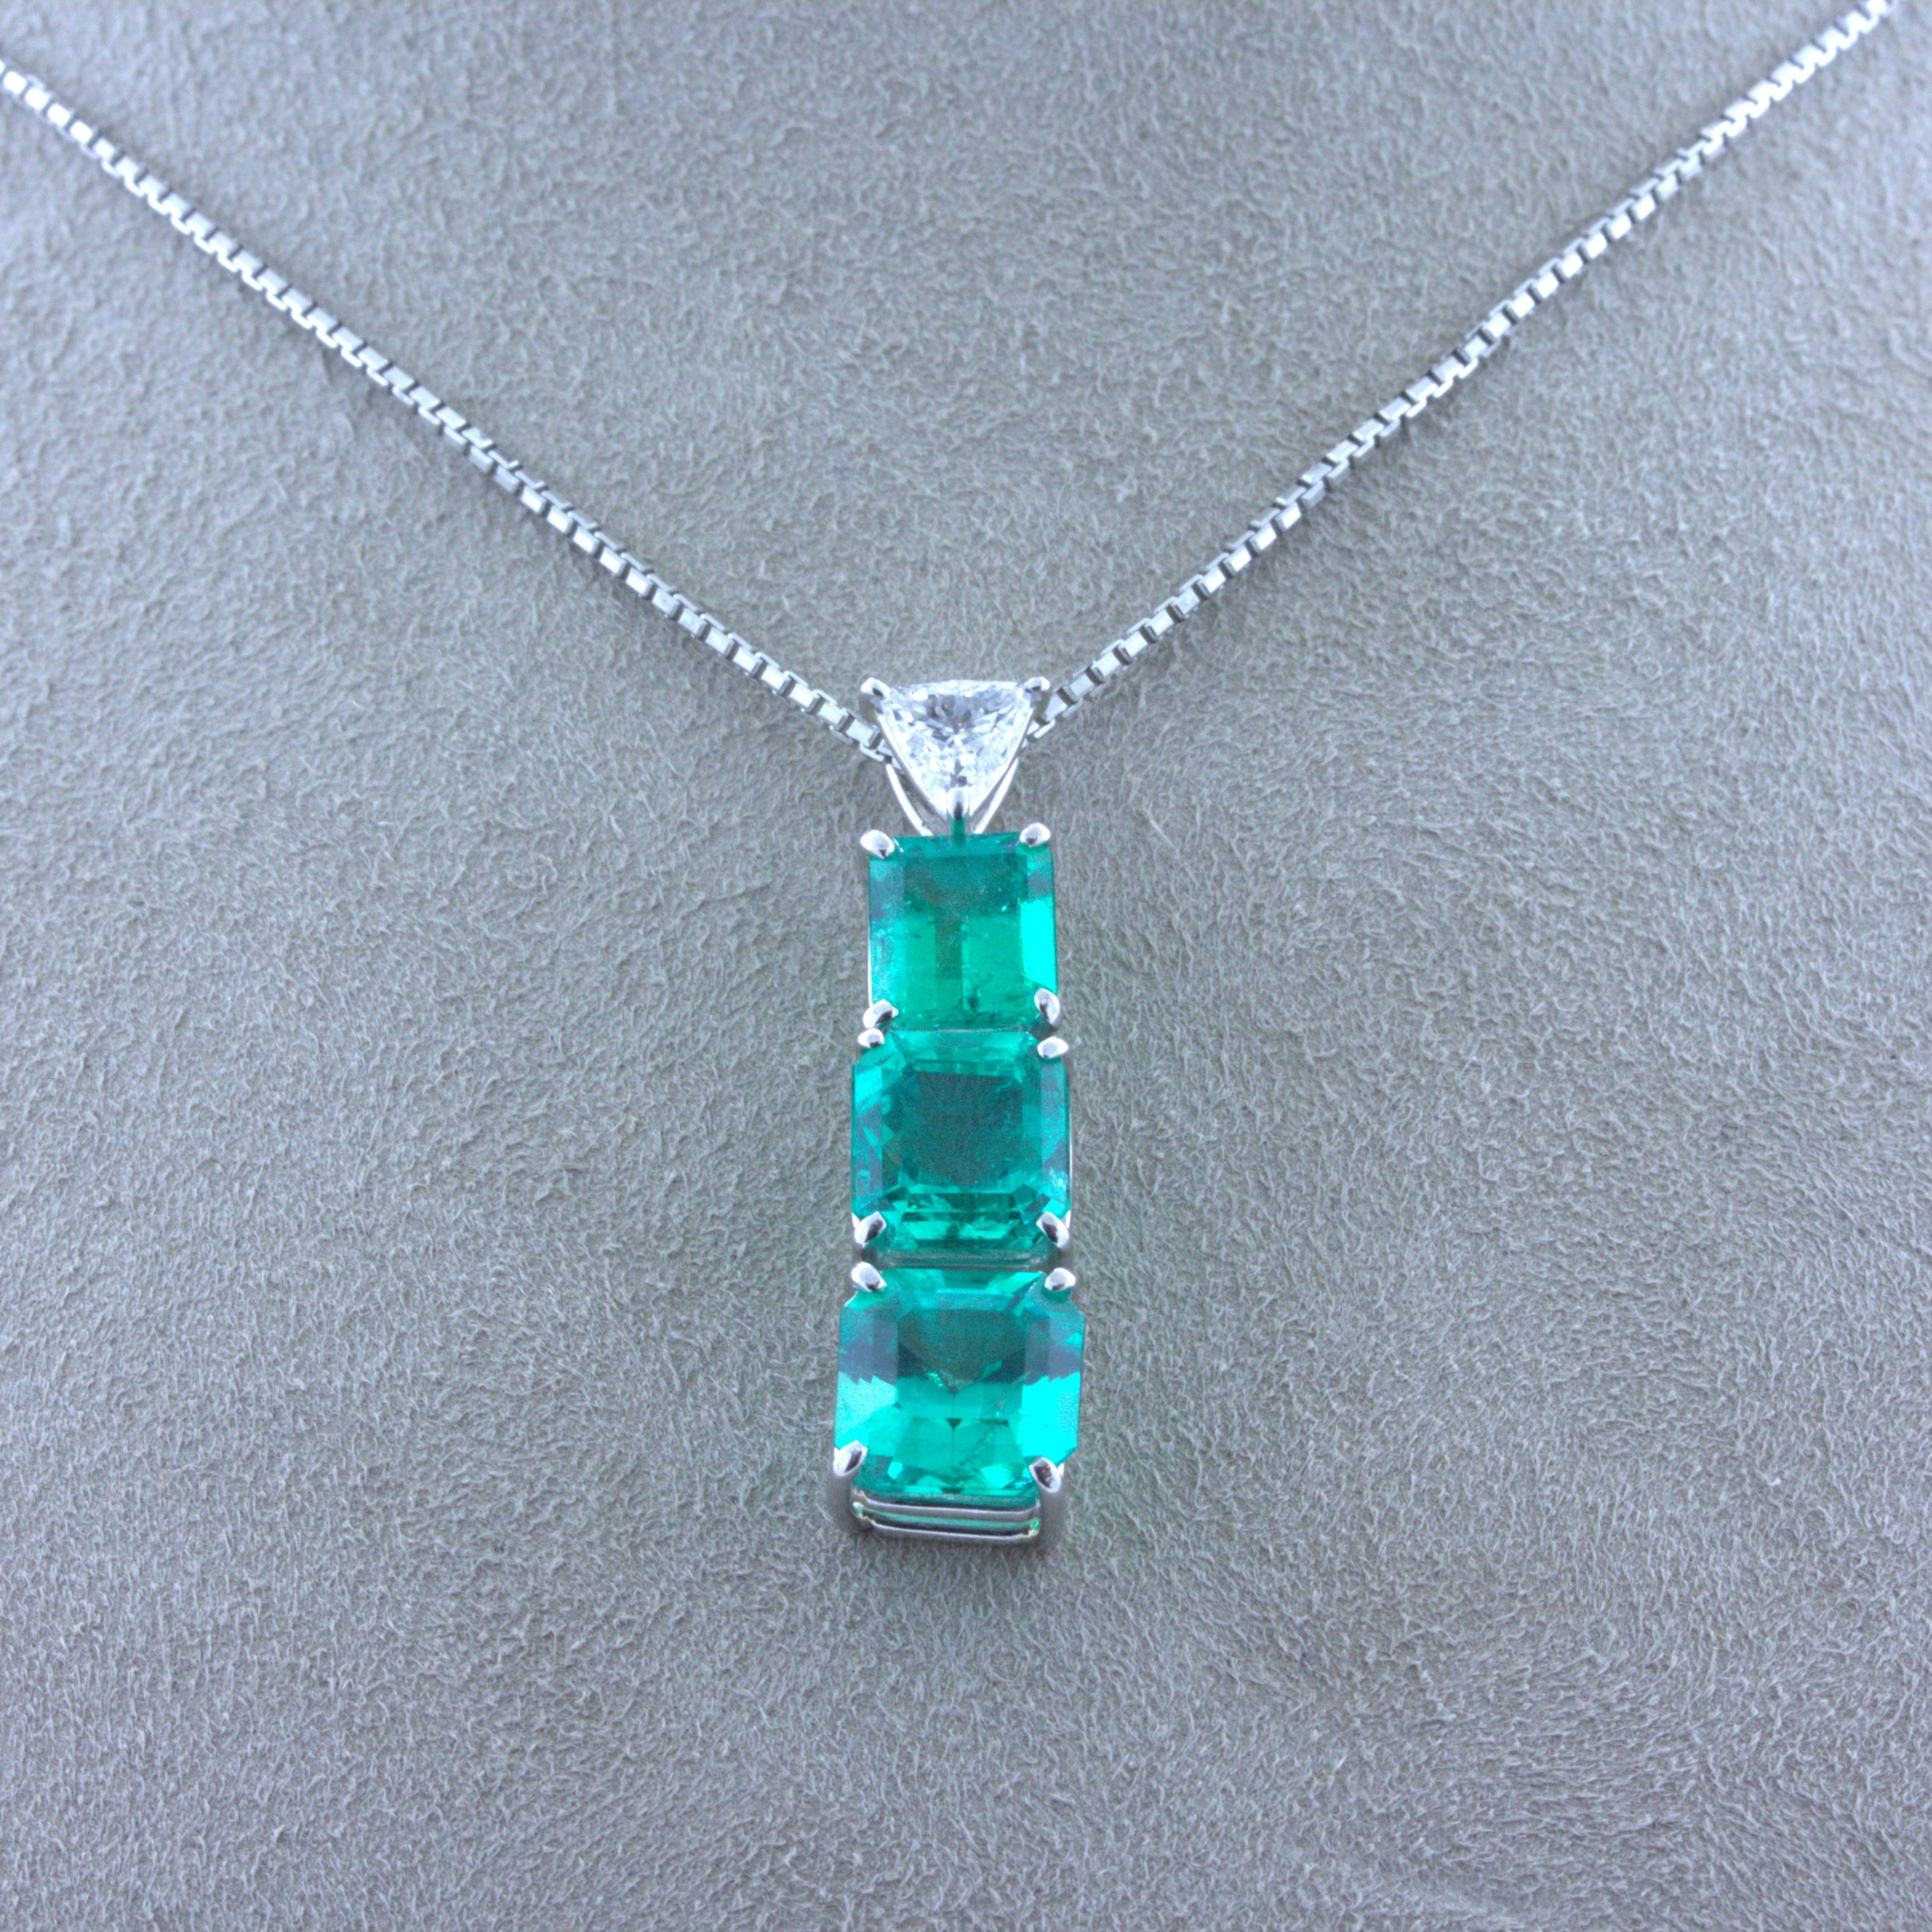 A very fine and unique pendant featuring 3 gem emeralds weighing a total of 4.15 carats. The emeralds have a rich and bright grass green color with excellent life and sparkle. They graduate in size and have a slight dangle and they are dropped from